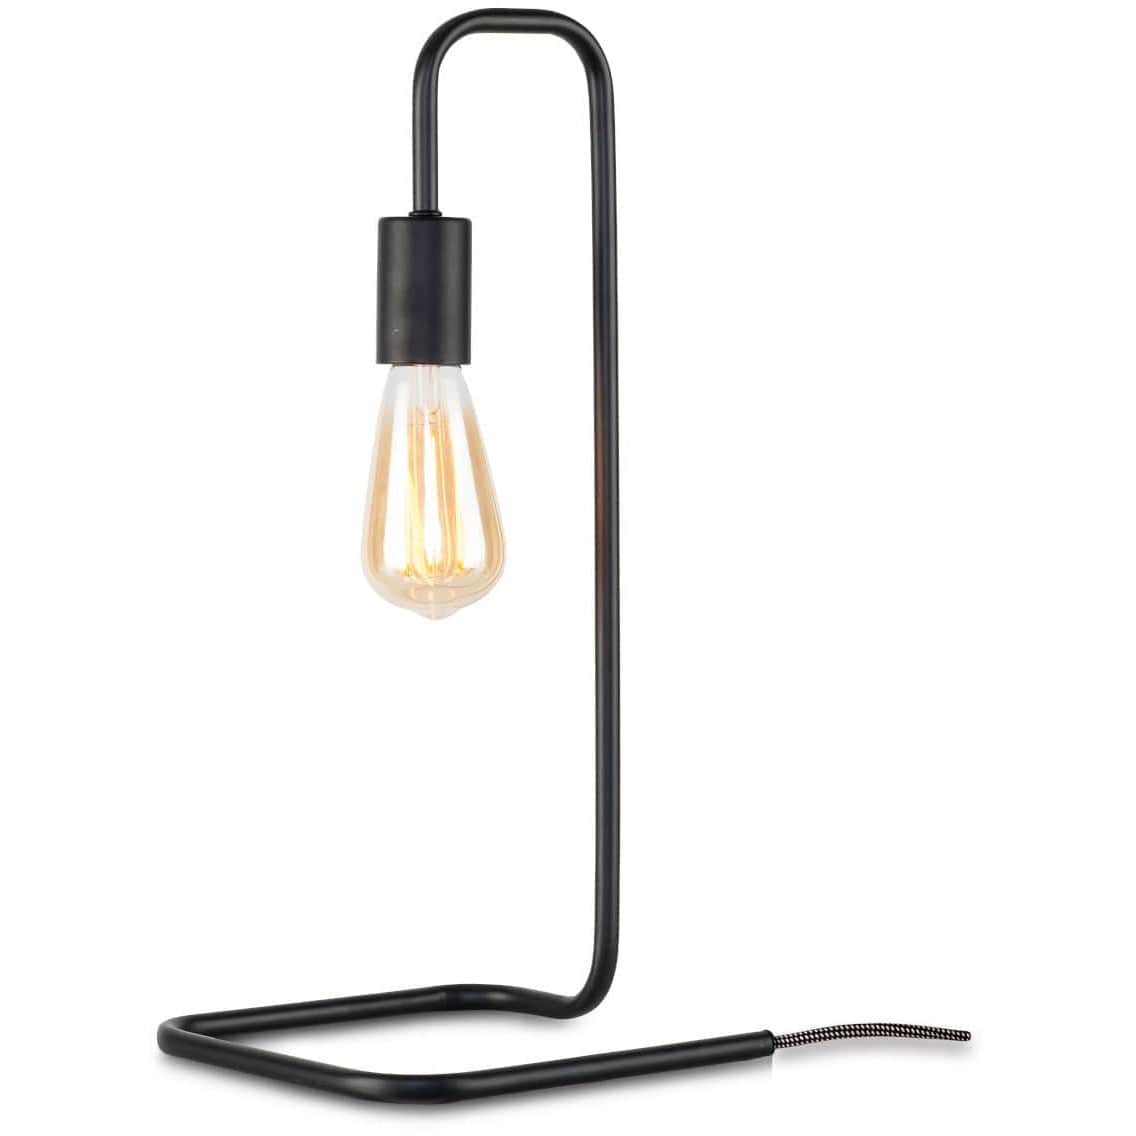 It's About RoMi Table Lamp Black London Table Lamp, Black or White